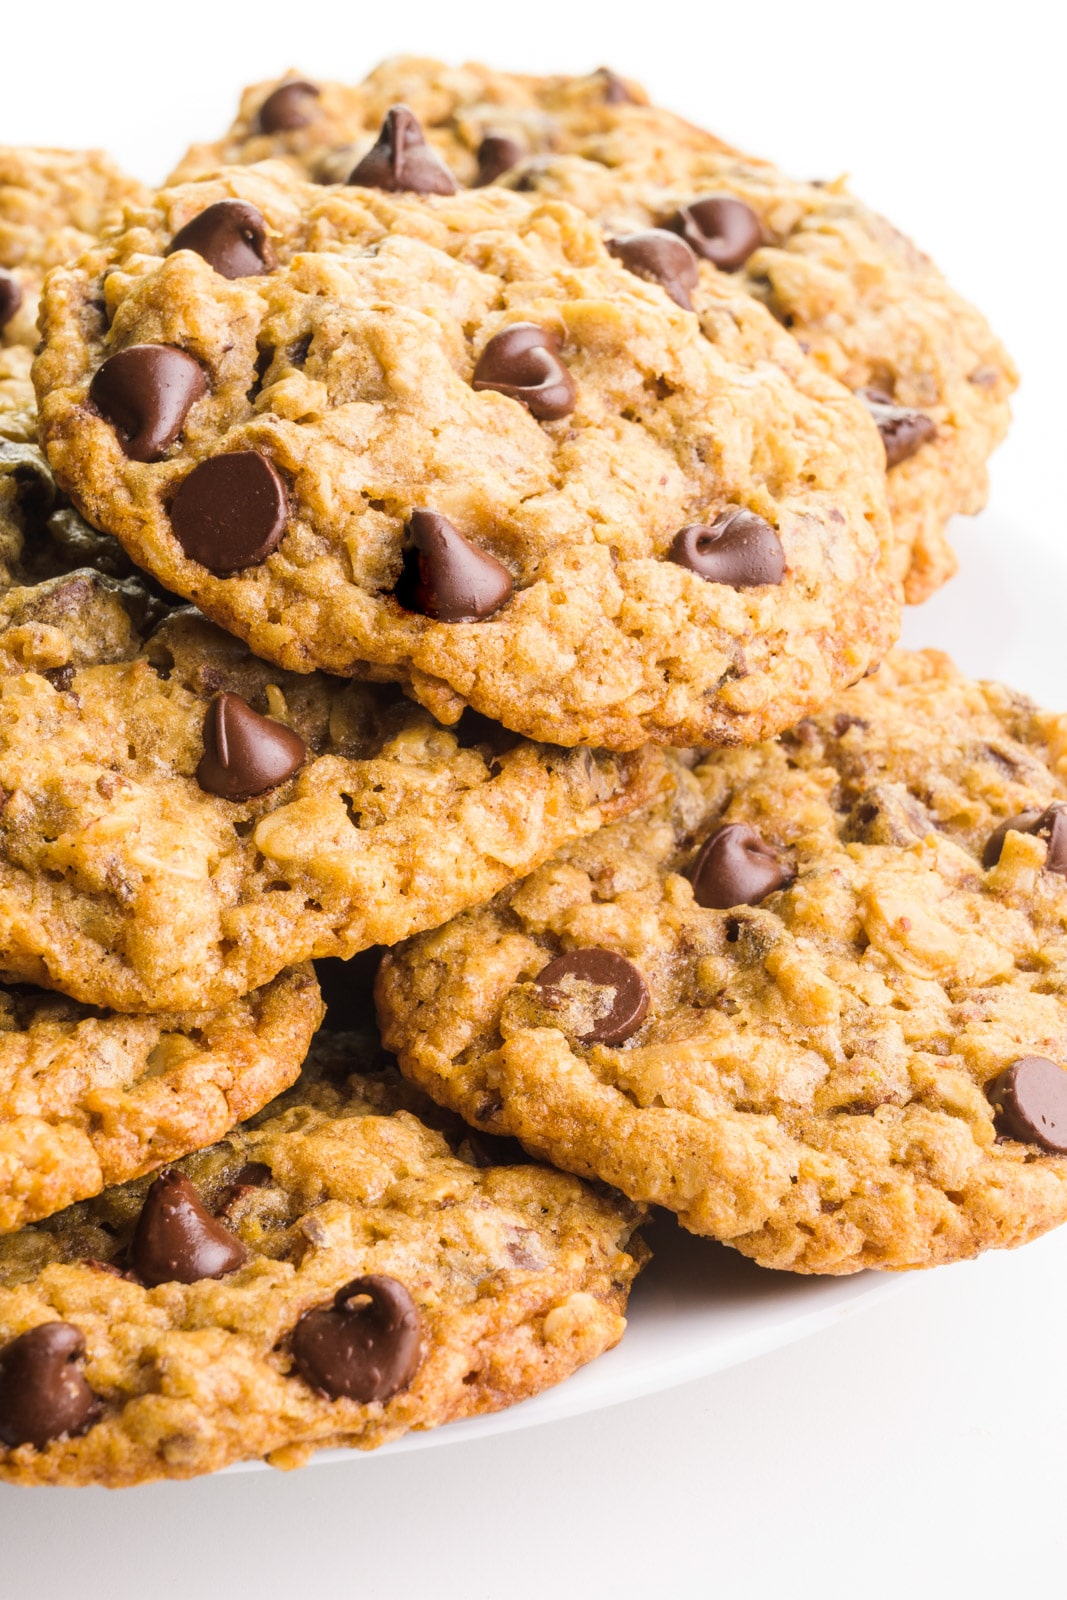 Several oatmeal chocolate chip cookies sit o a plate, showing melty chocolate chips on top.